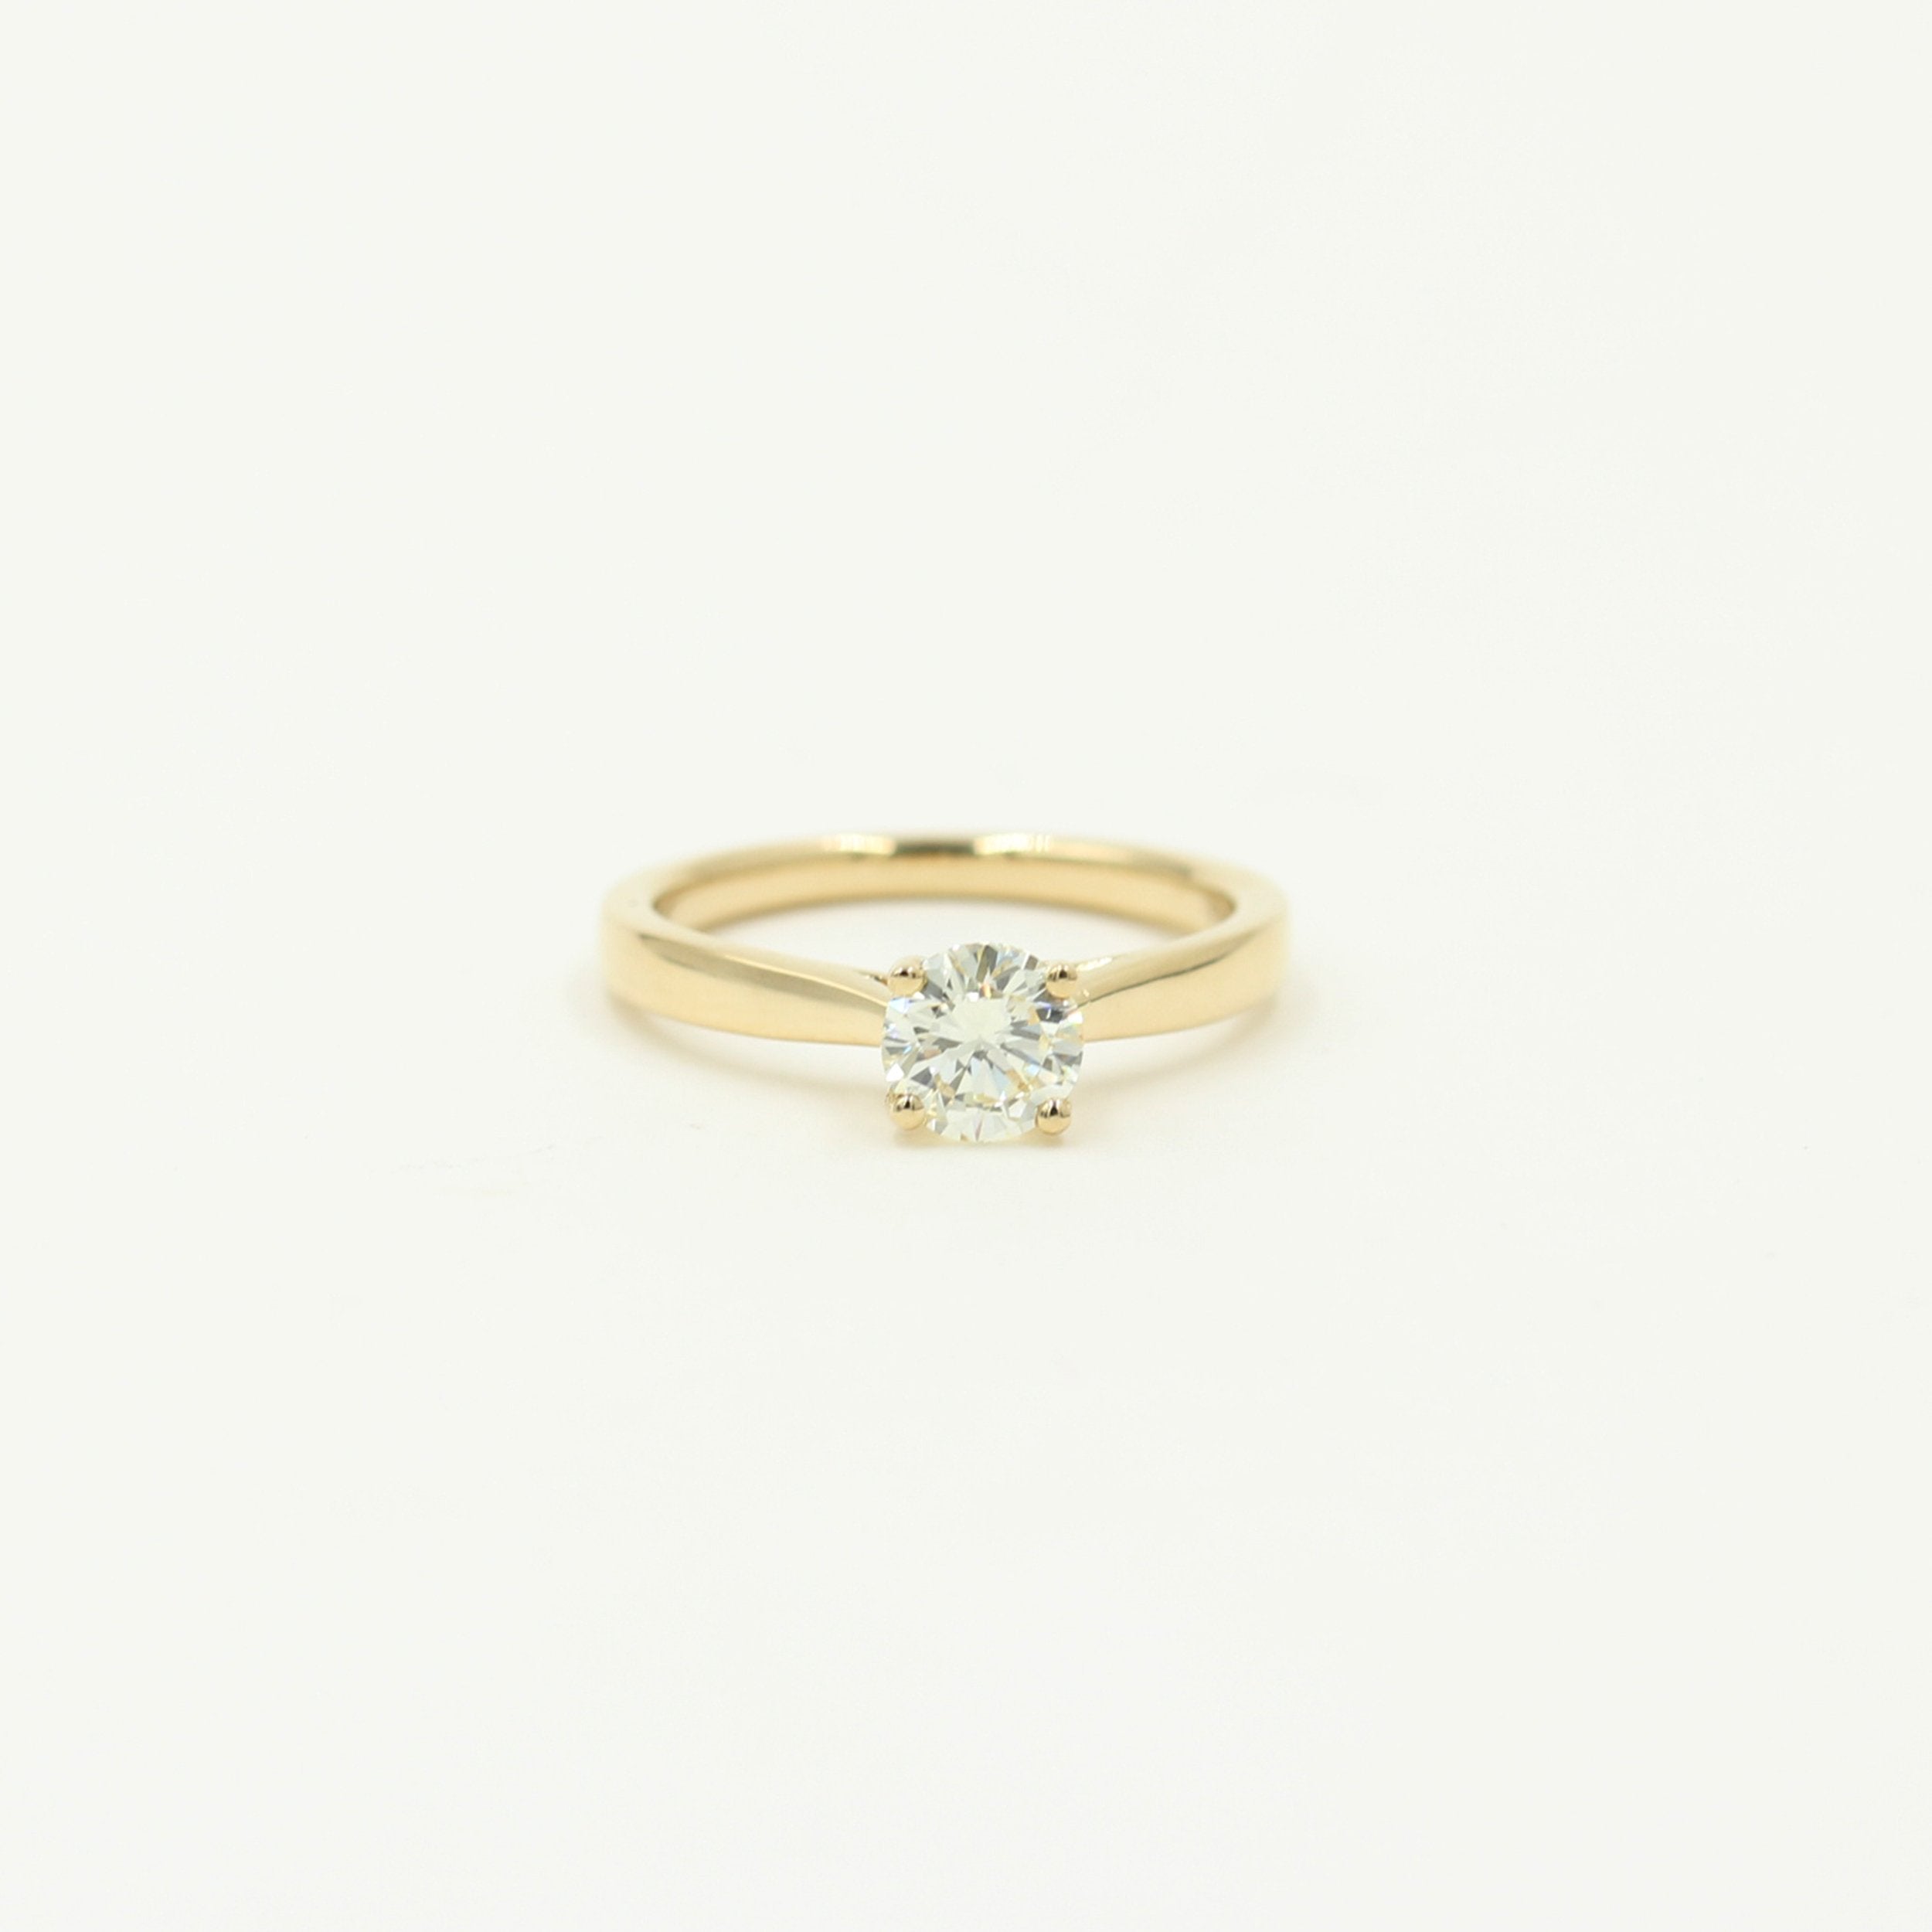 Solitairering med 0,90 ct. L.SI2